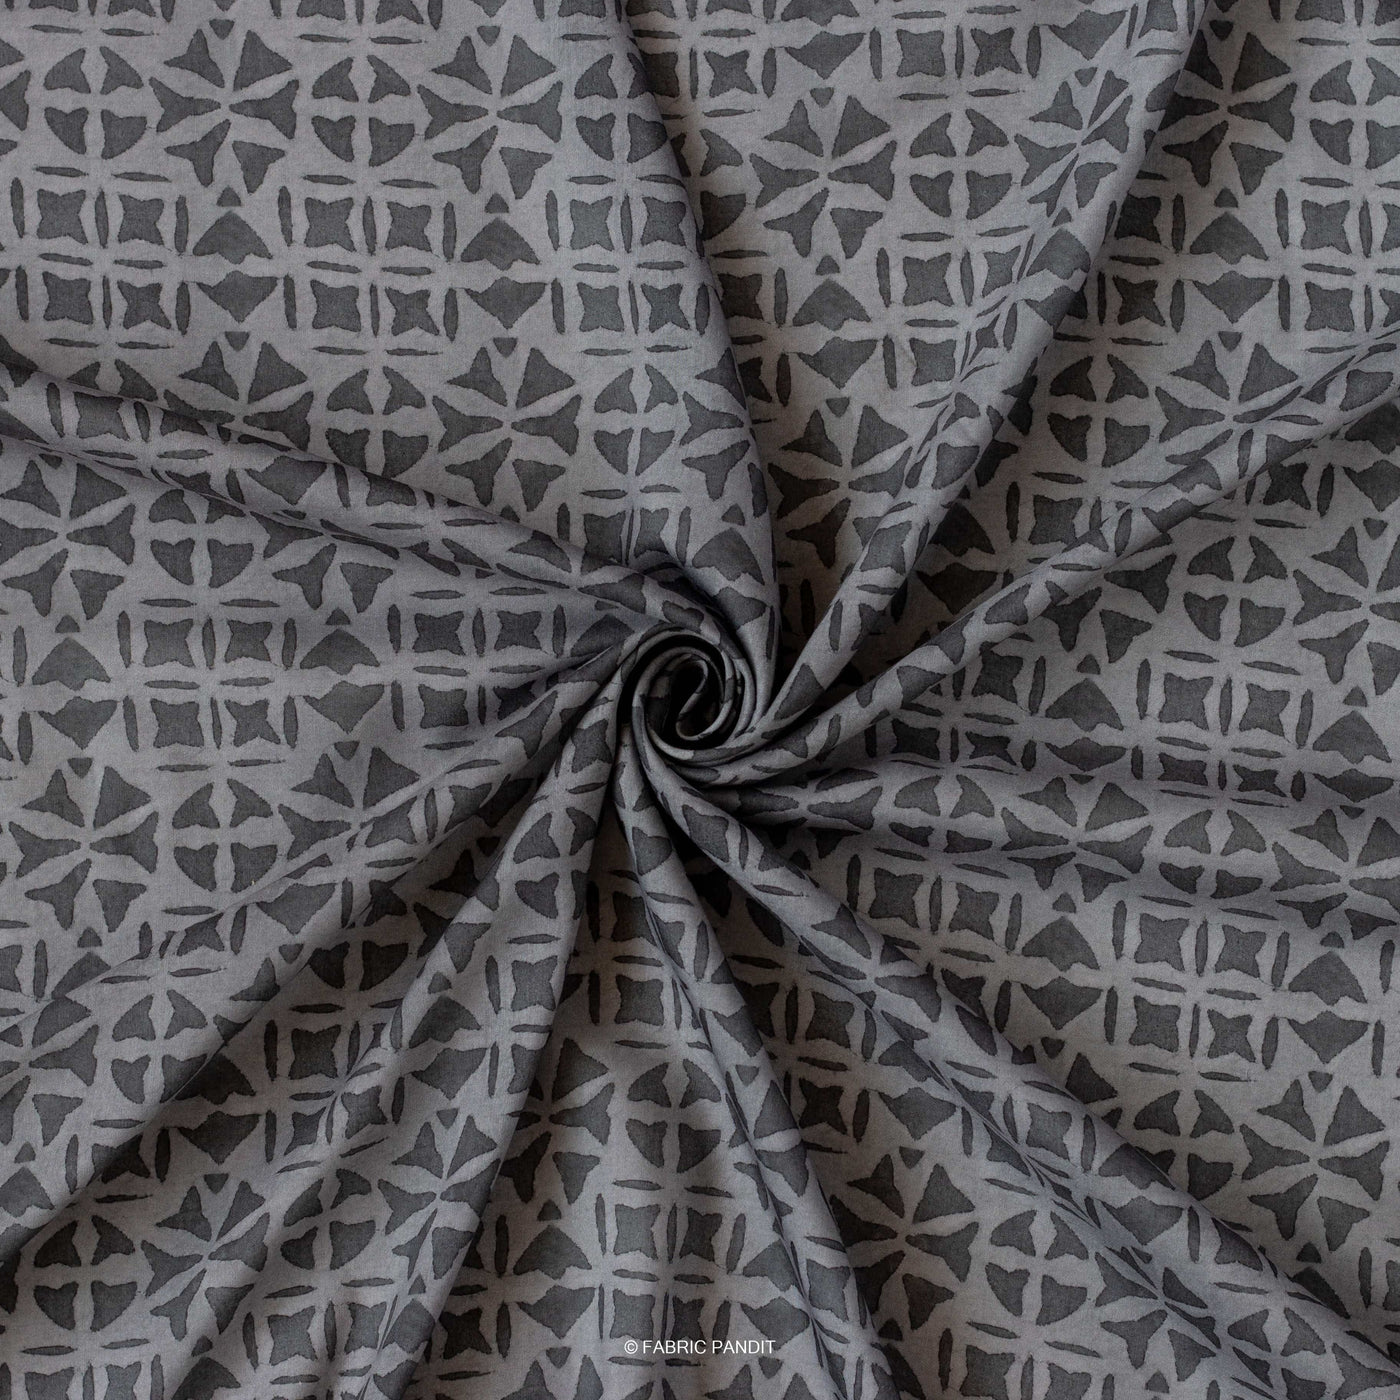 Fabric Pandit Cut Piece (CUT PIECE) Charcoal Black Squares And Circles Geometric Applique Pattern Digital Printed Muslin Fabric (Width 44 Inches)